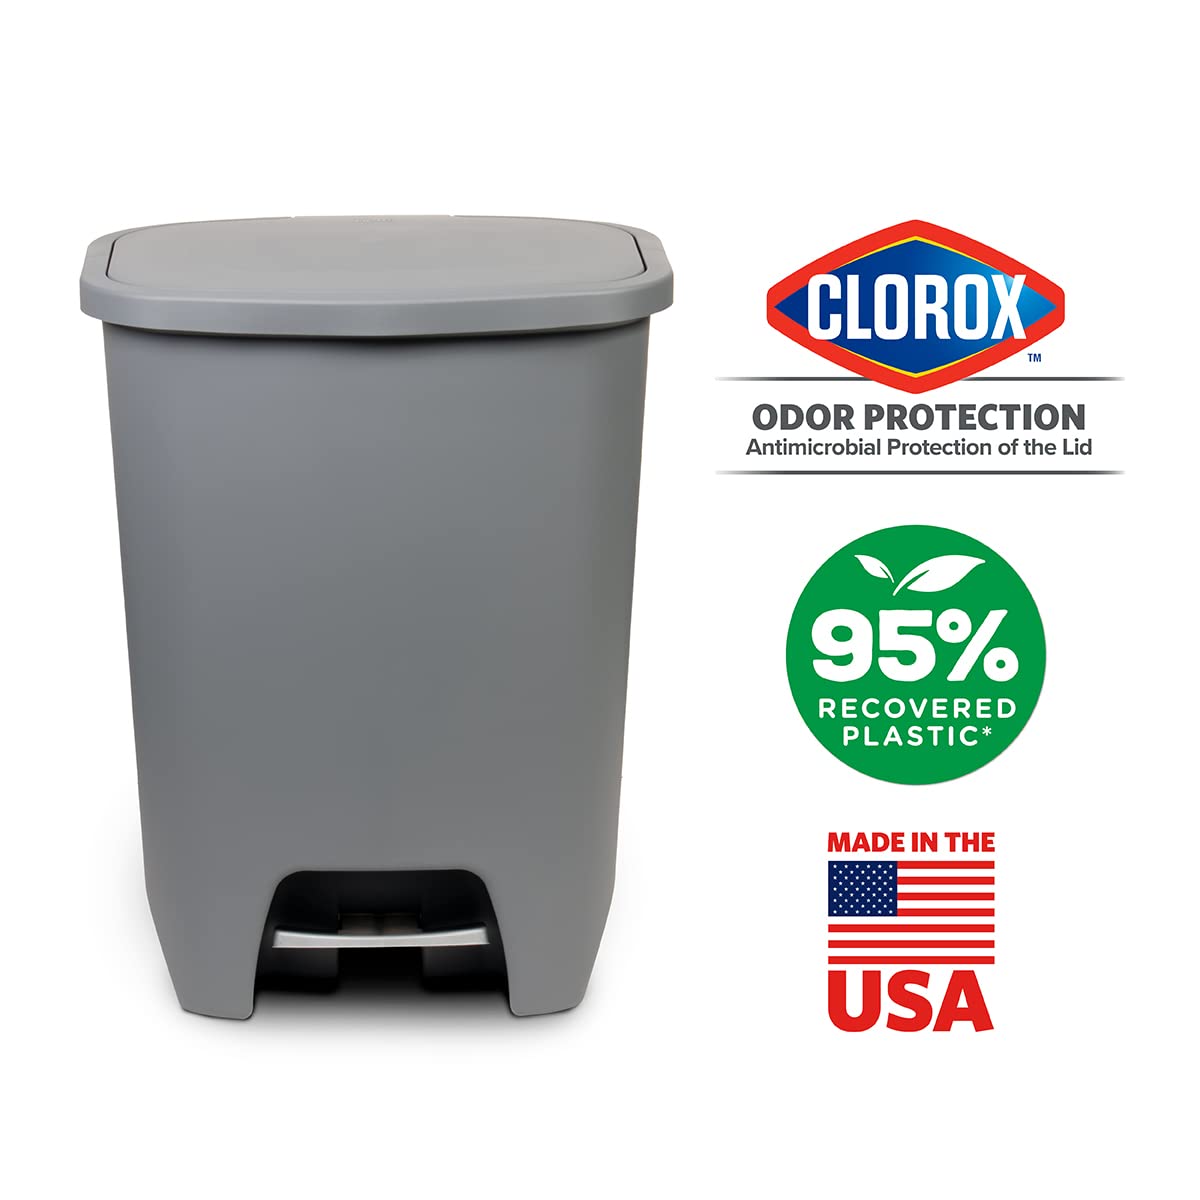 https://bigbigmart.com/wp-content/uploads/2023/10/Glad-Kitchen-Trash-Can-Large-Plastic-Waste-Bin-with-Odor-Protection-of-Lid-Hands-Free-with-Step-On-Foot-Pedal-and-Garbage-Bag-Rings-20-Gallon-Grey2.jpg